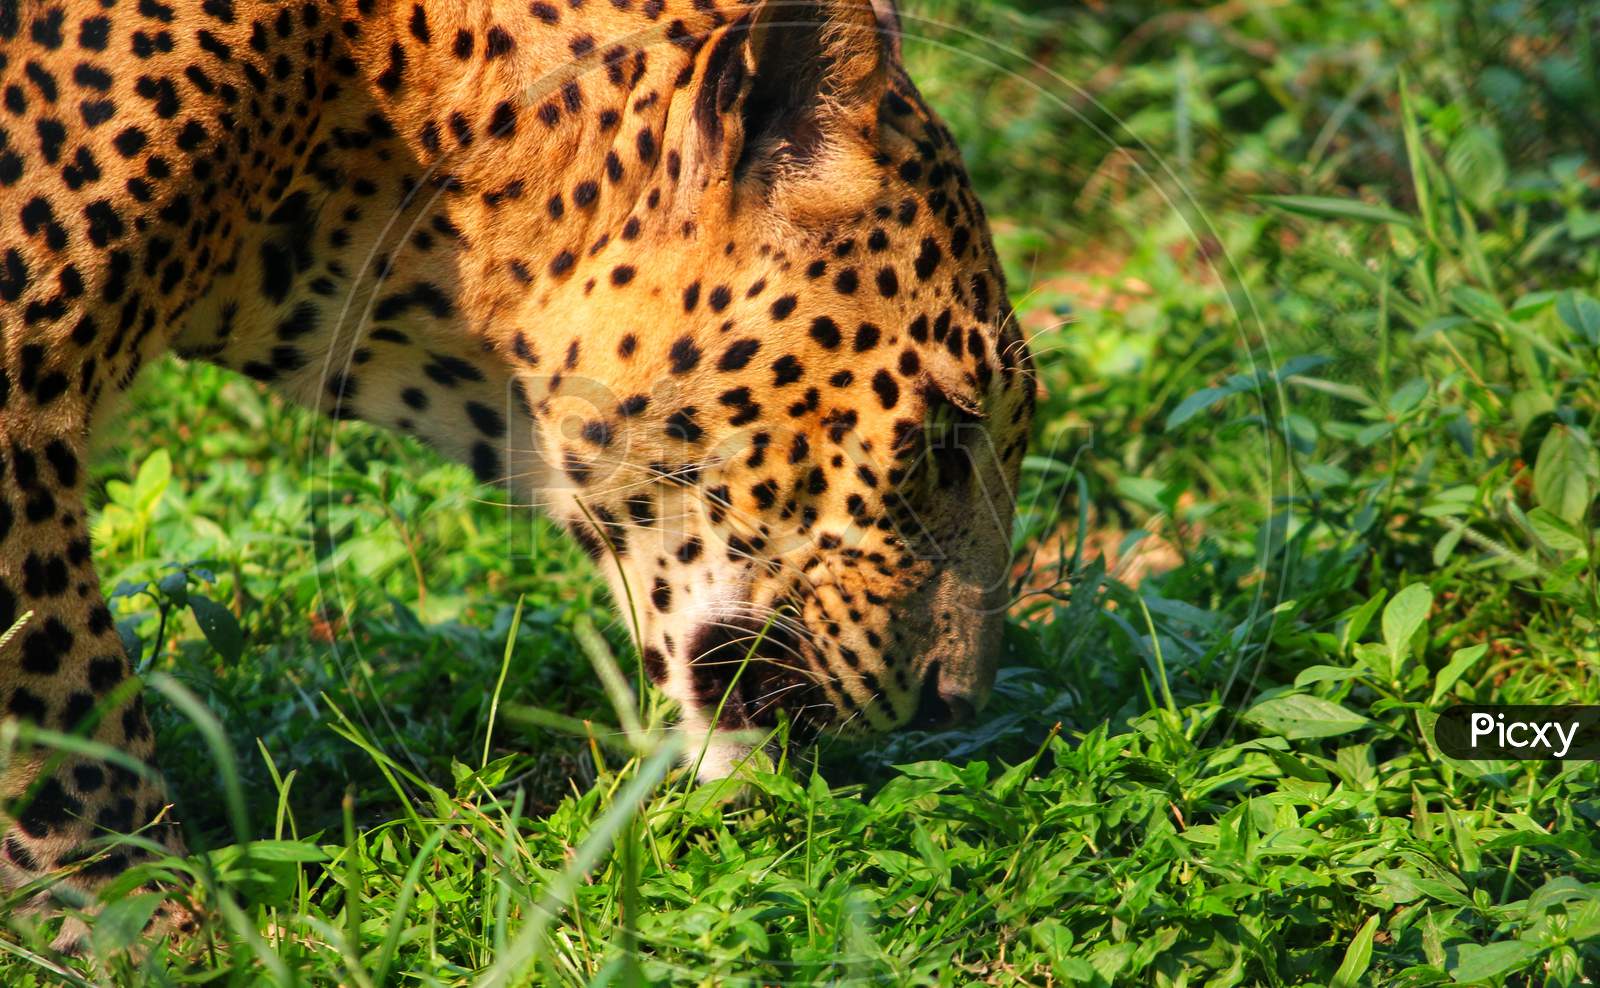 A Close Up Of Leopard's face